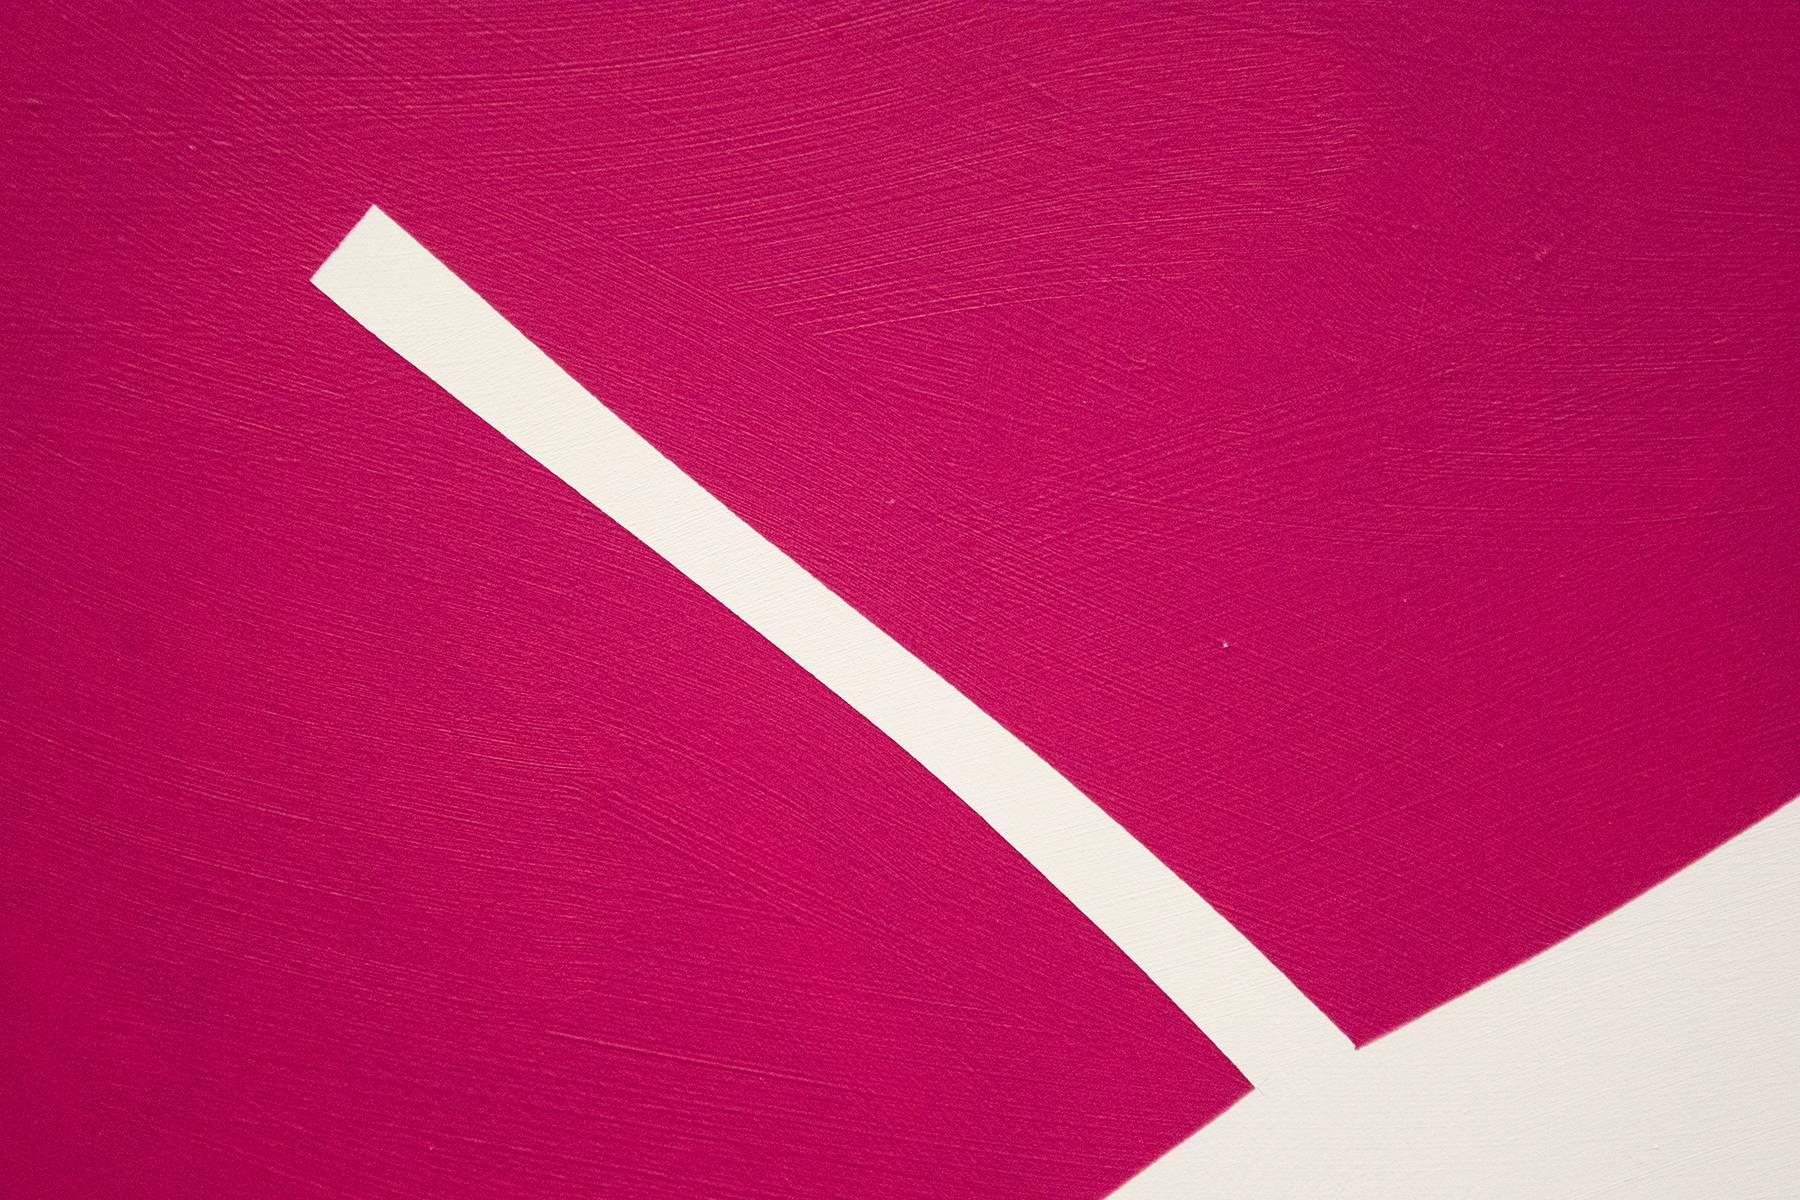 Round Magenta with Two Lines - colourful, gold leaf edge, acrylic tondo on panel - Gold Abstract Painting by Aron Hill